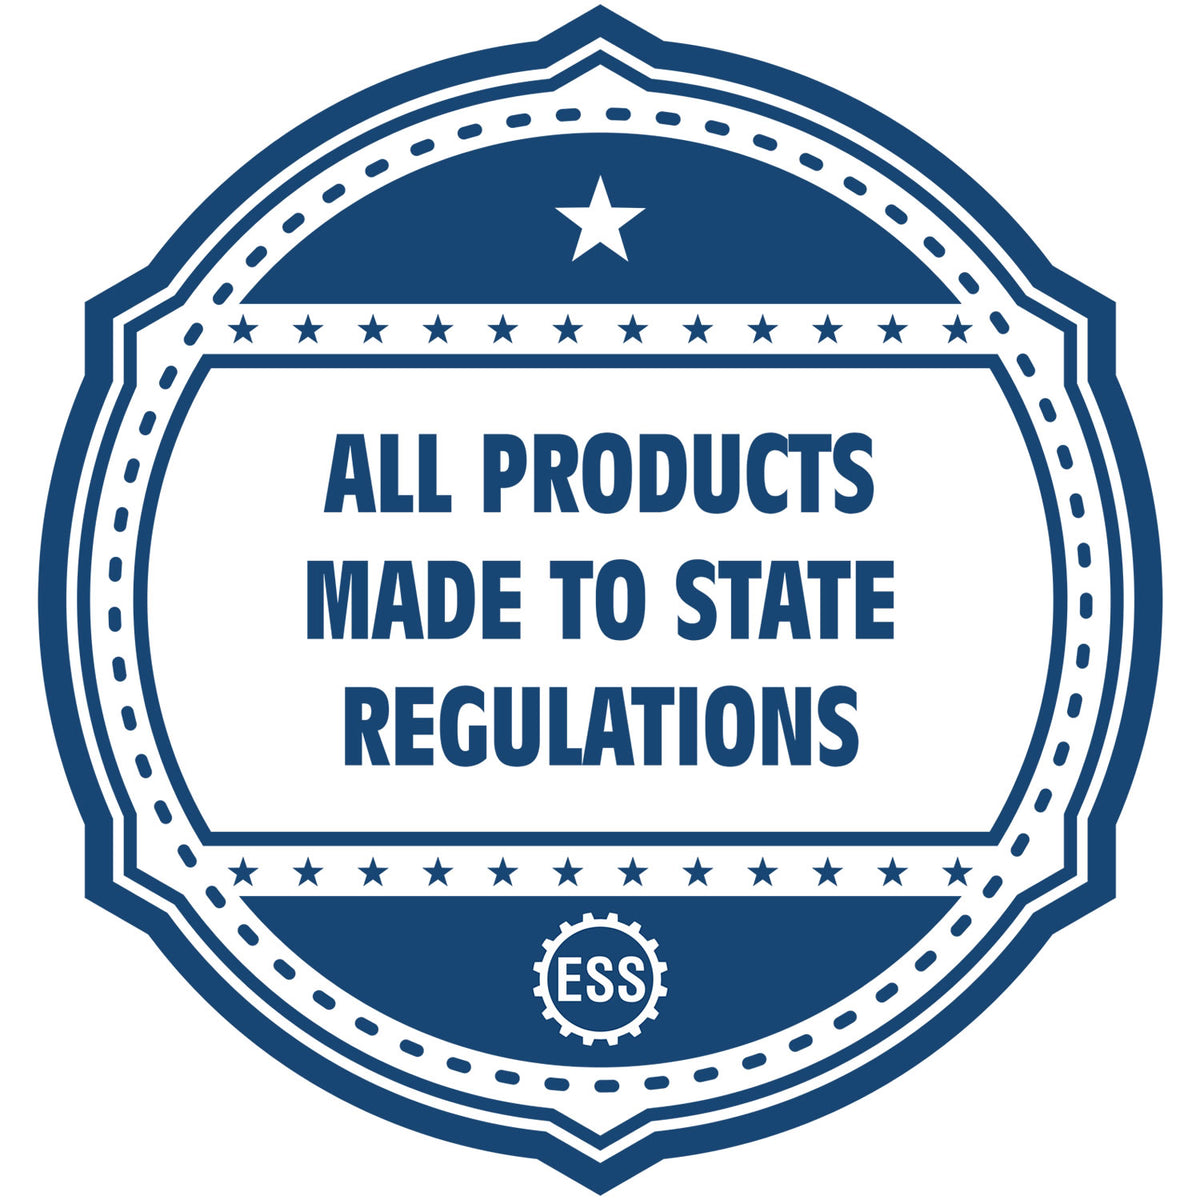 An icon or badge element for the PSI West Virginia Notary Stamp showing that this product is made in compliance with state regulations.